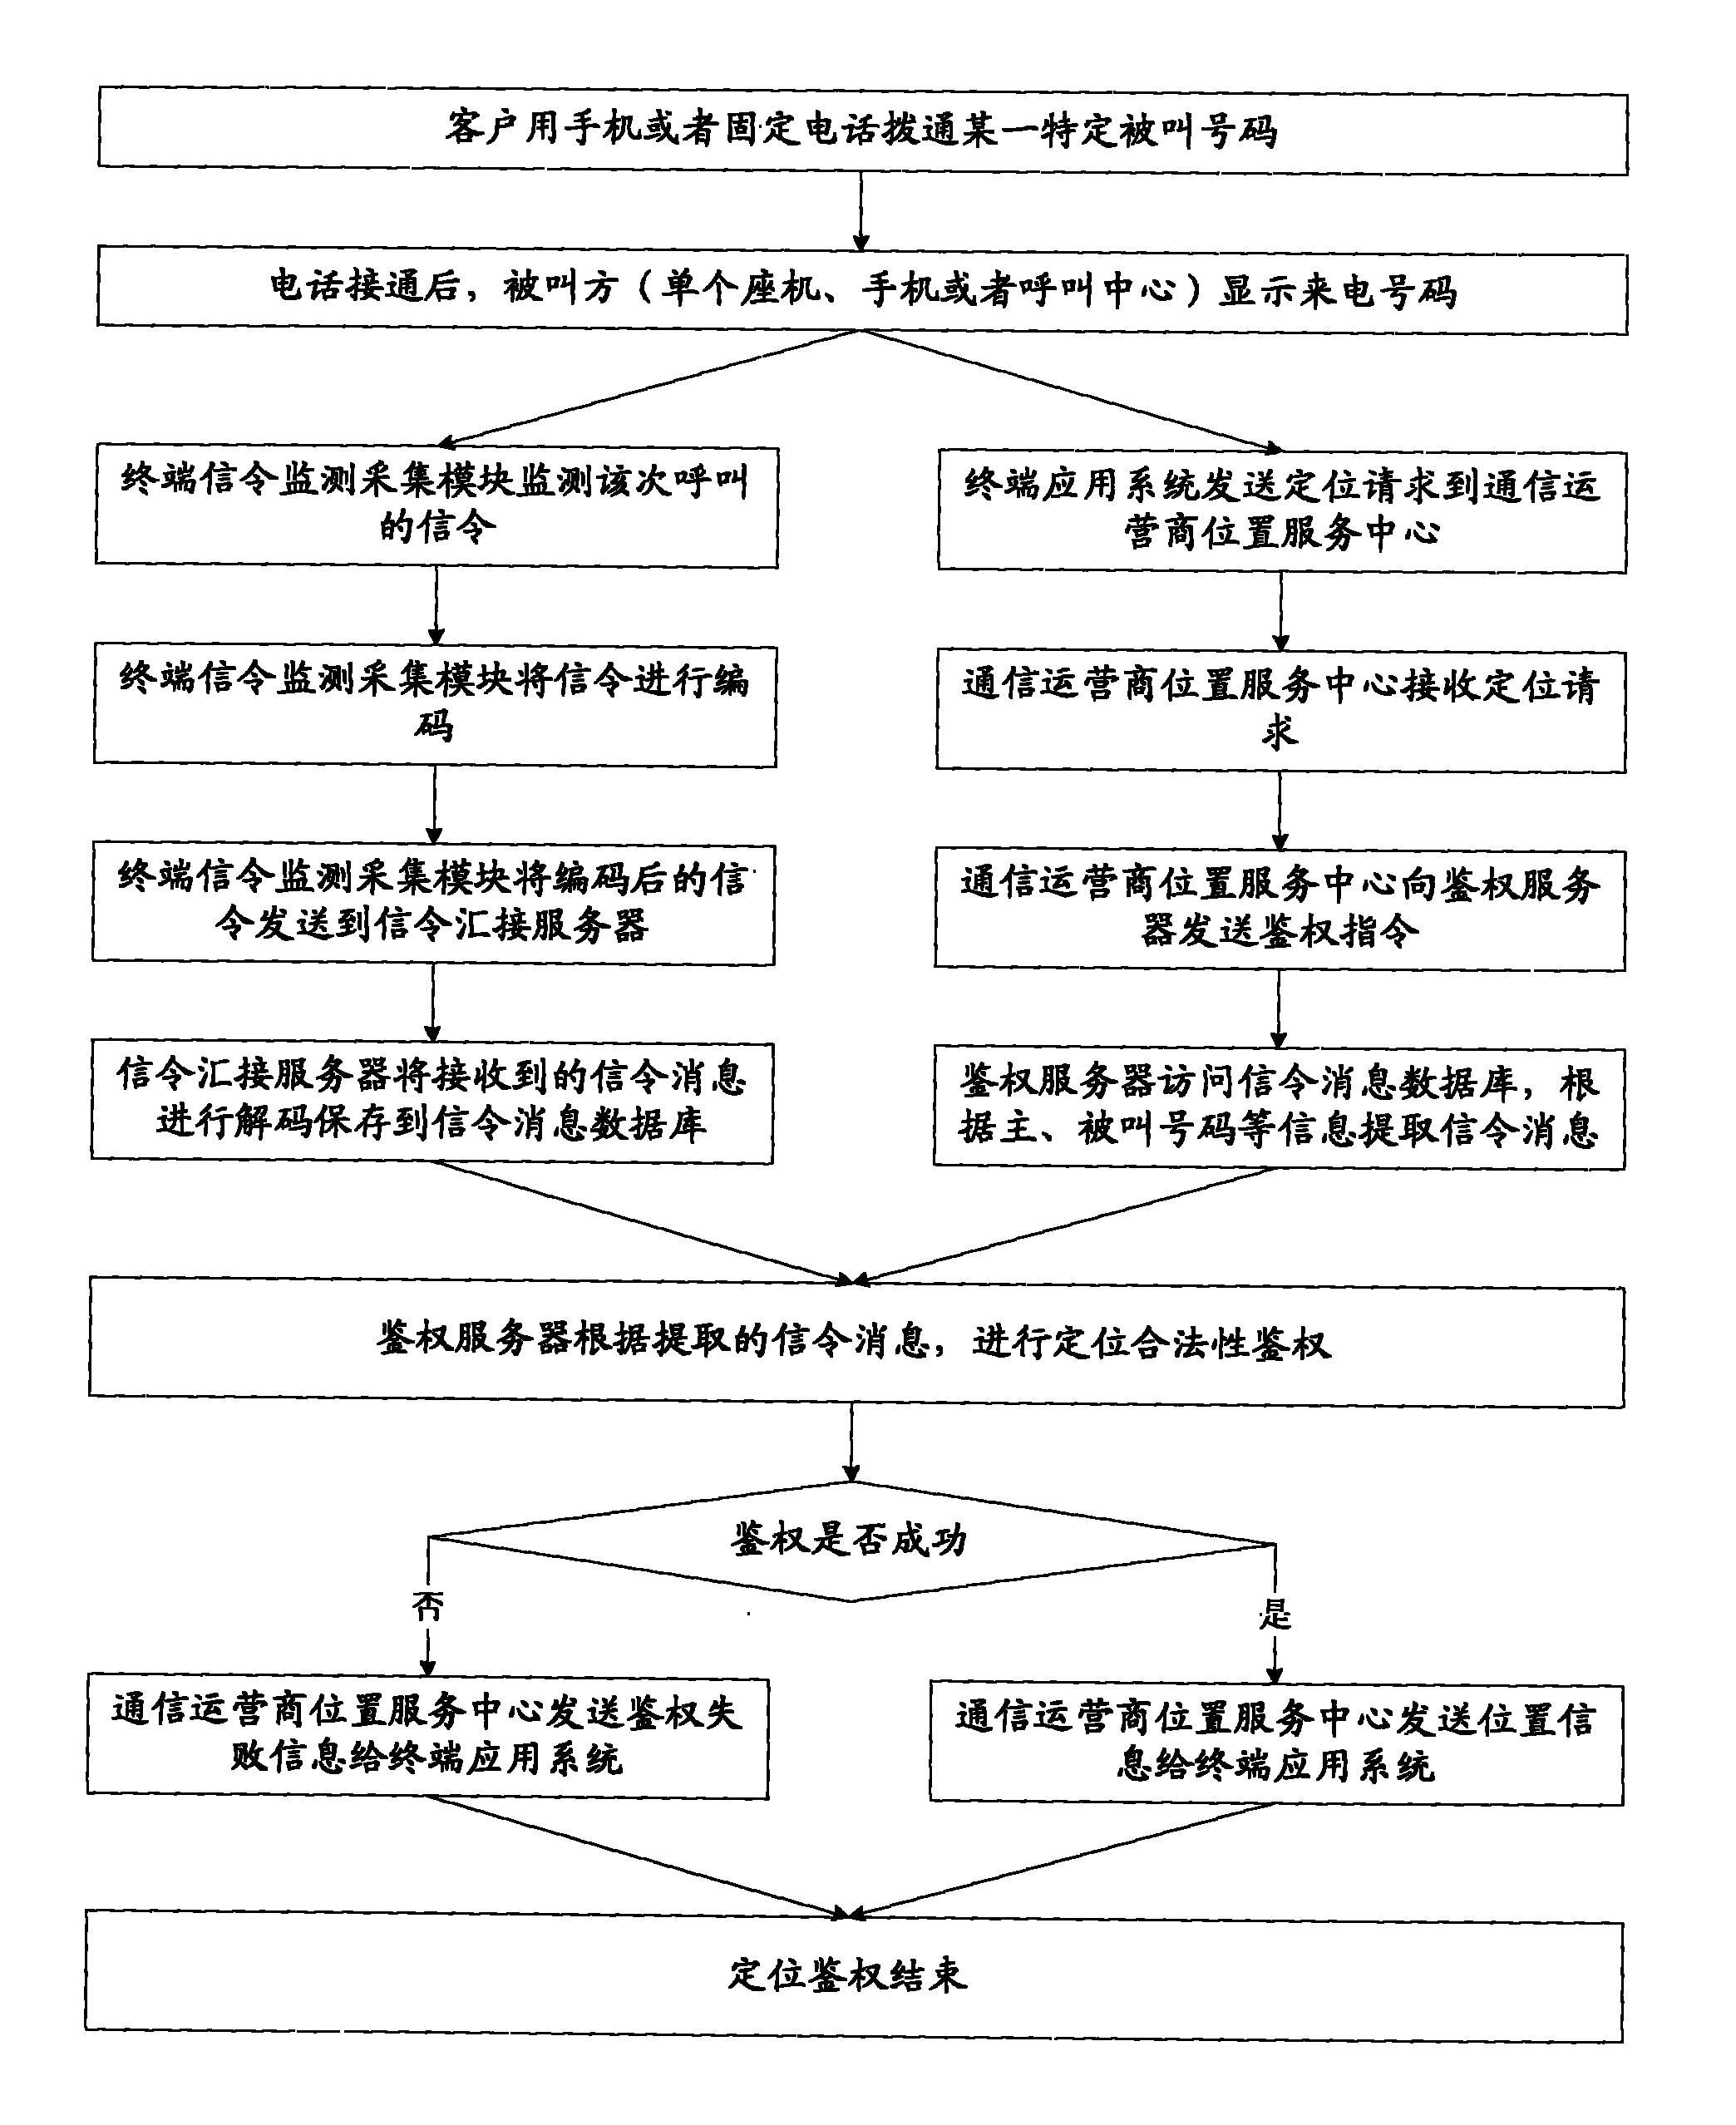 System and method for implementing positioning authentication by monitoring signaling of distributed terminal